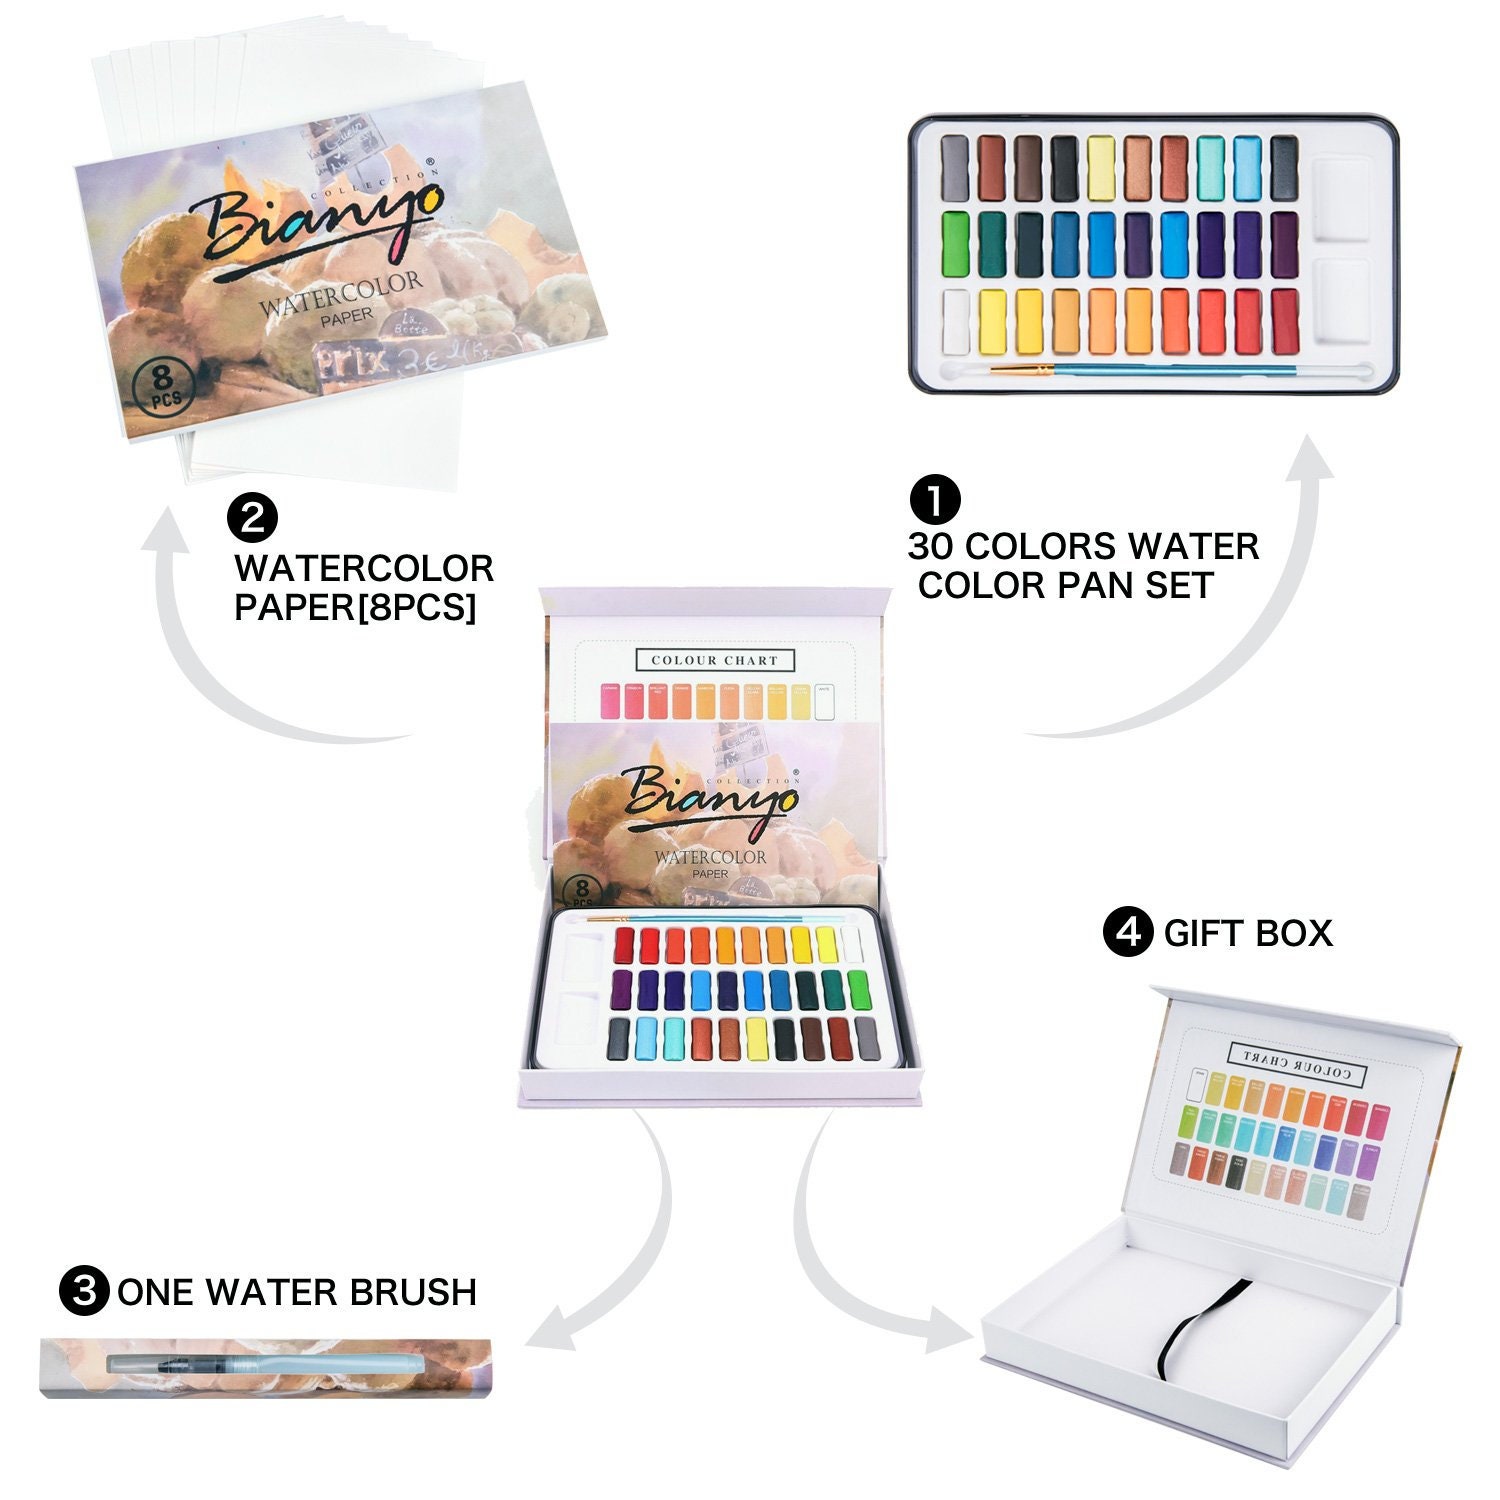 BIANYO 36 Watercolor Paint Vibrant Colors Watercolor Paper&10 Brush-palette  for Kids Adults Painting,coloring, Gift Travel Case 